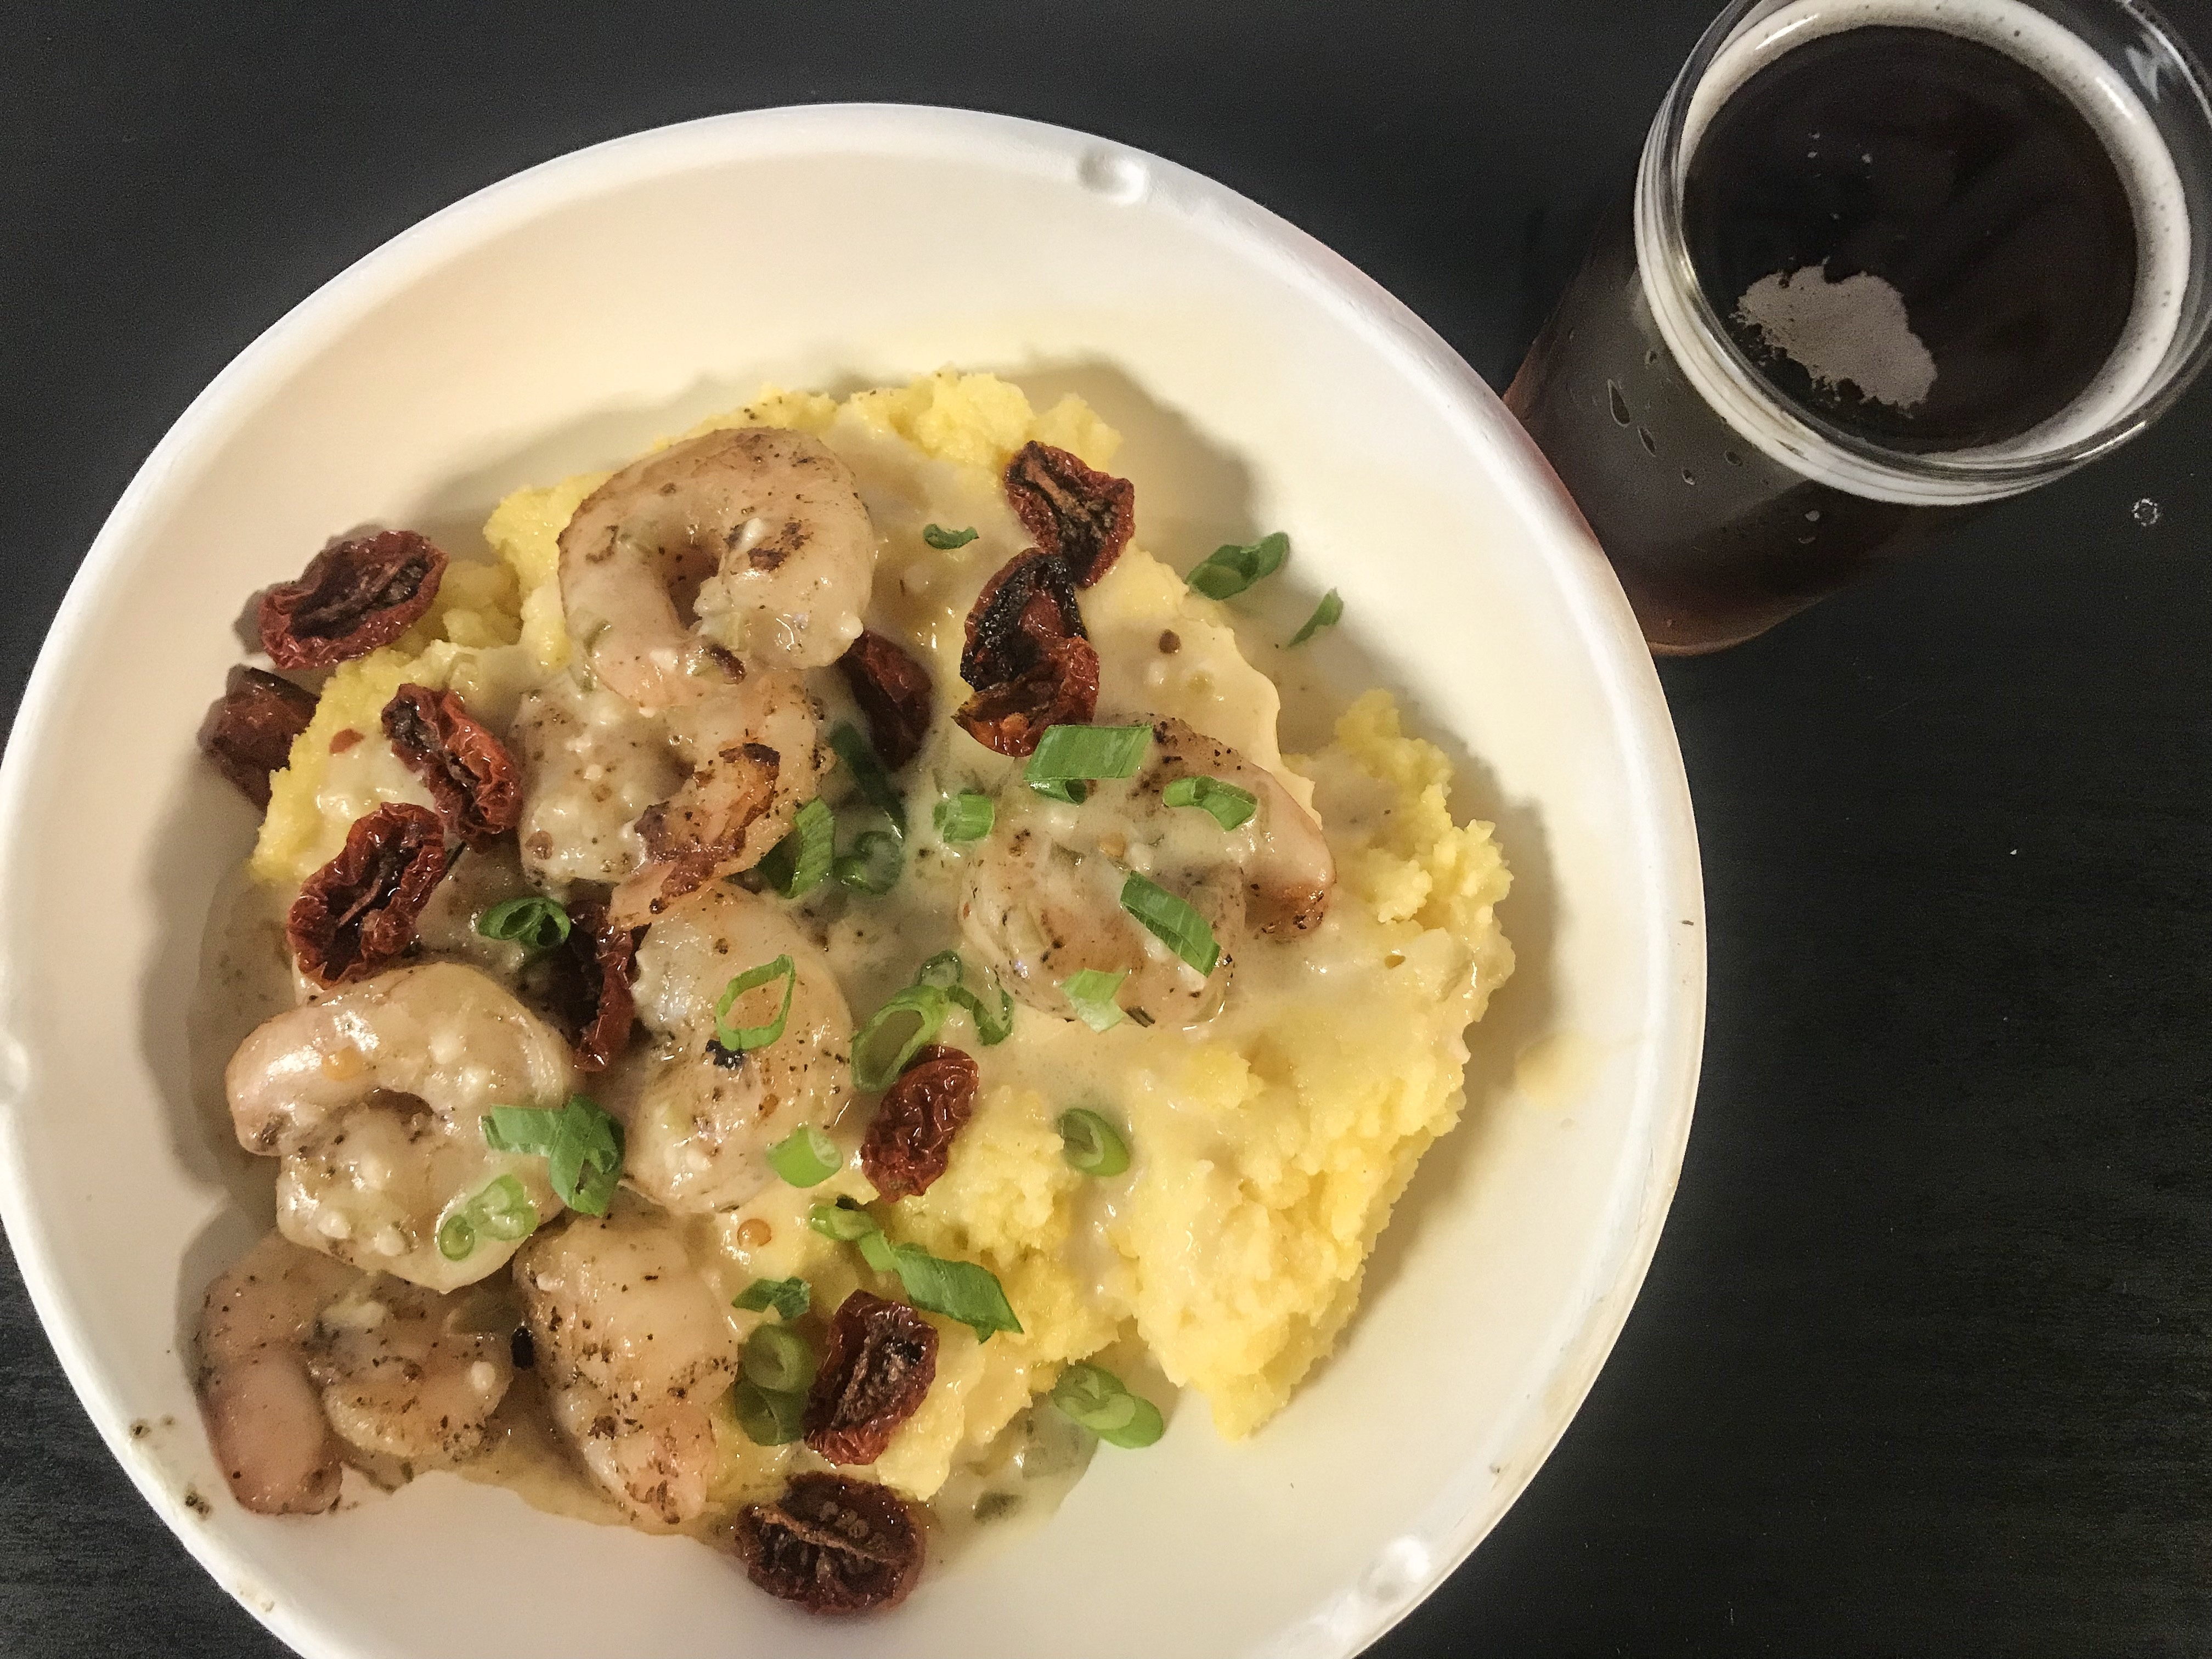 Shrimp and Grits with Mission to Marzen